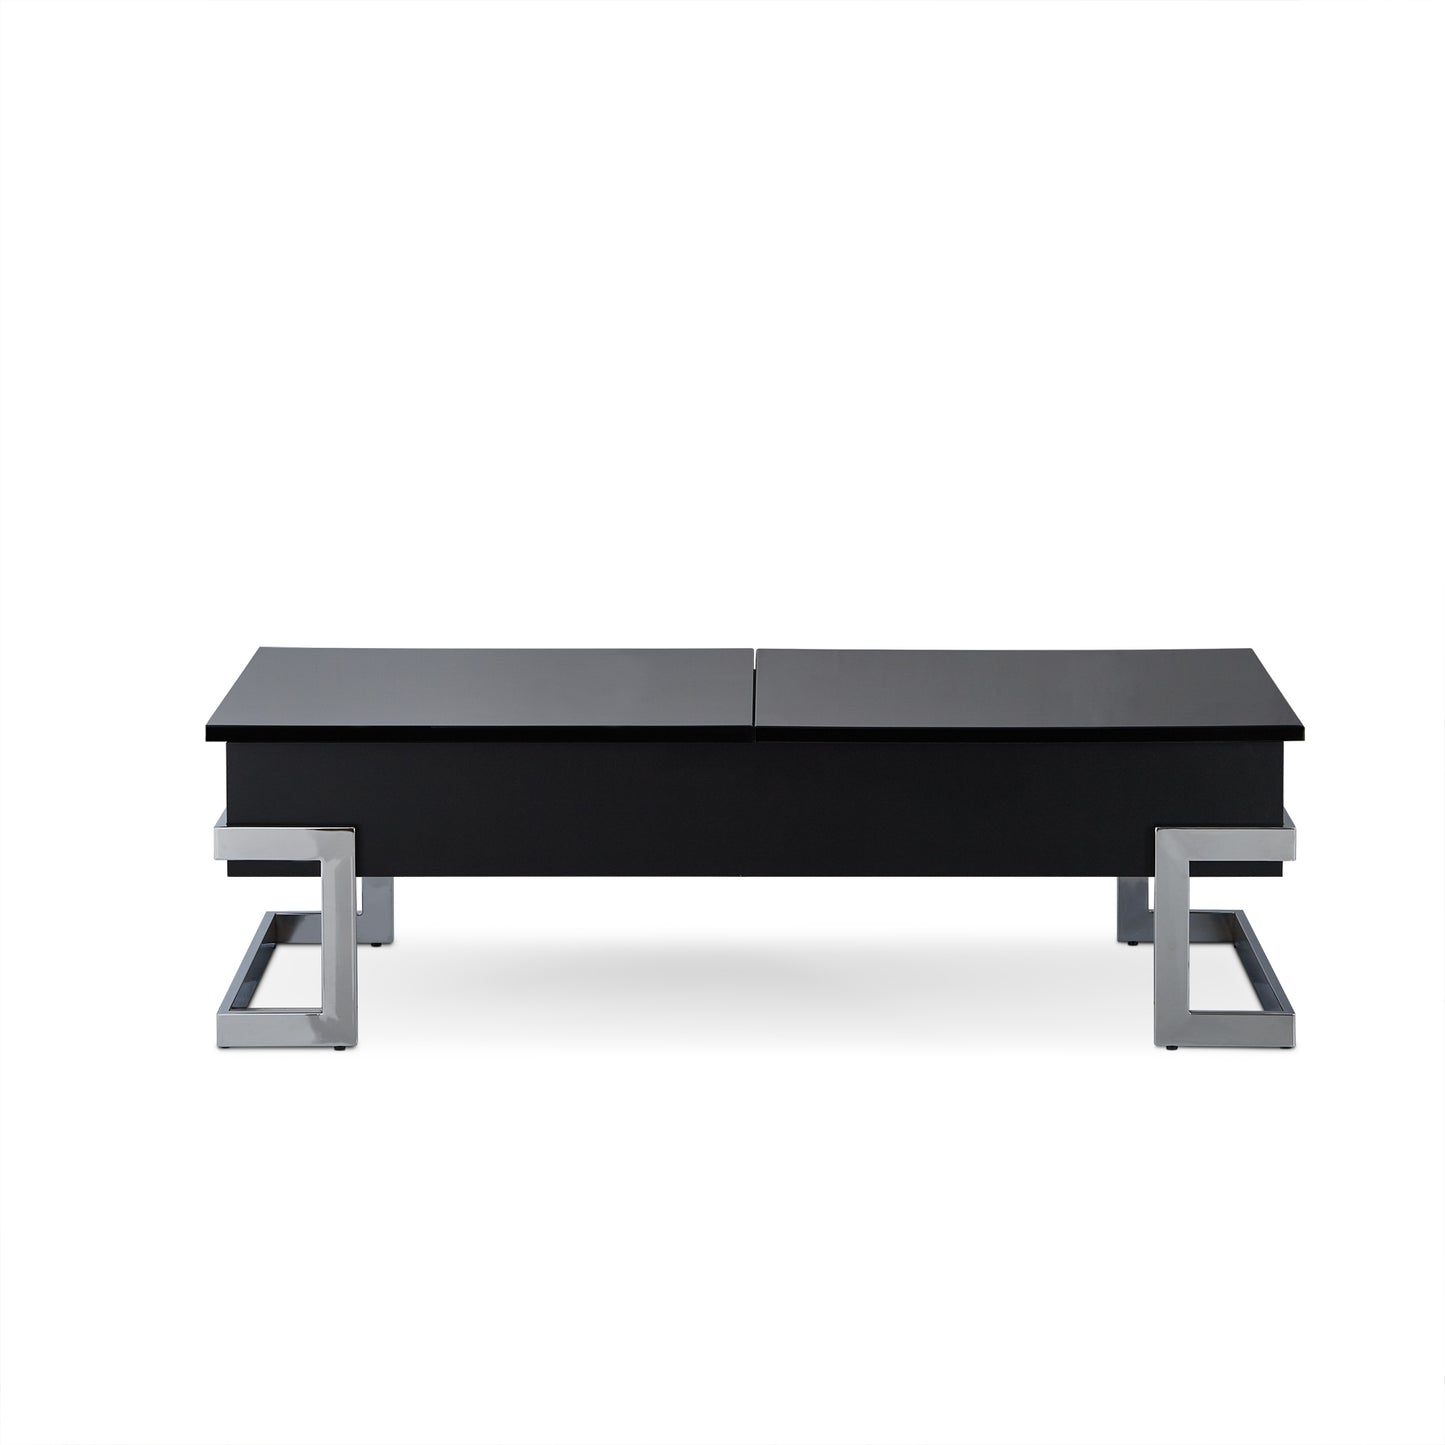 47' X 20' X 14-24' Black And Chrome Particle Board Coffee Table